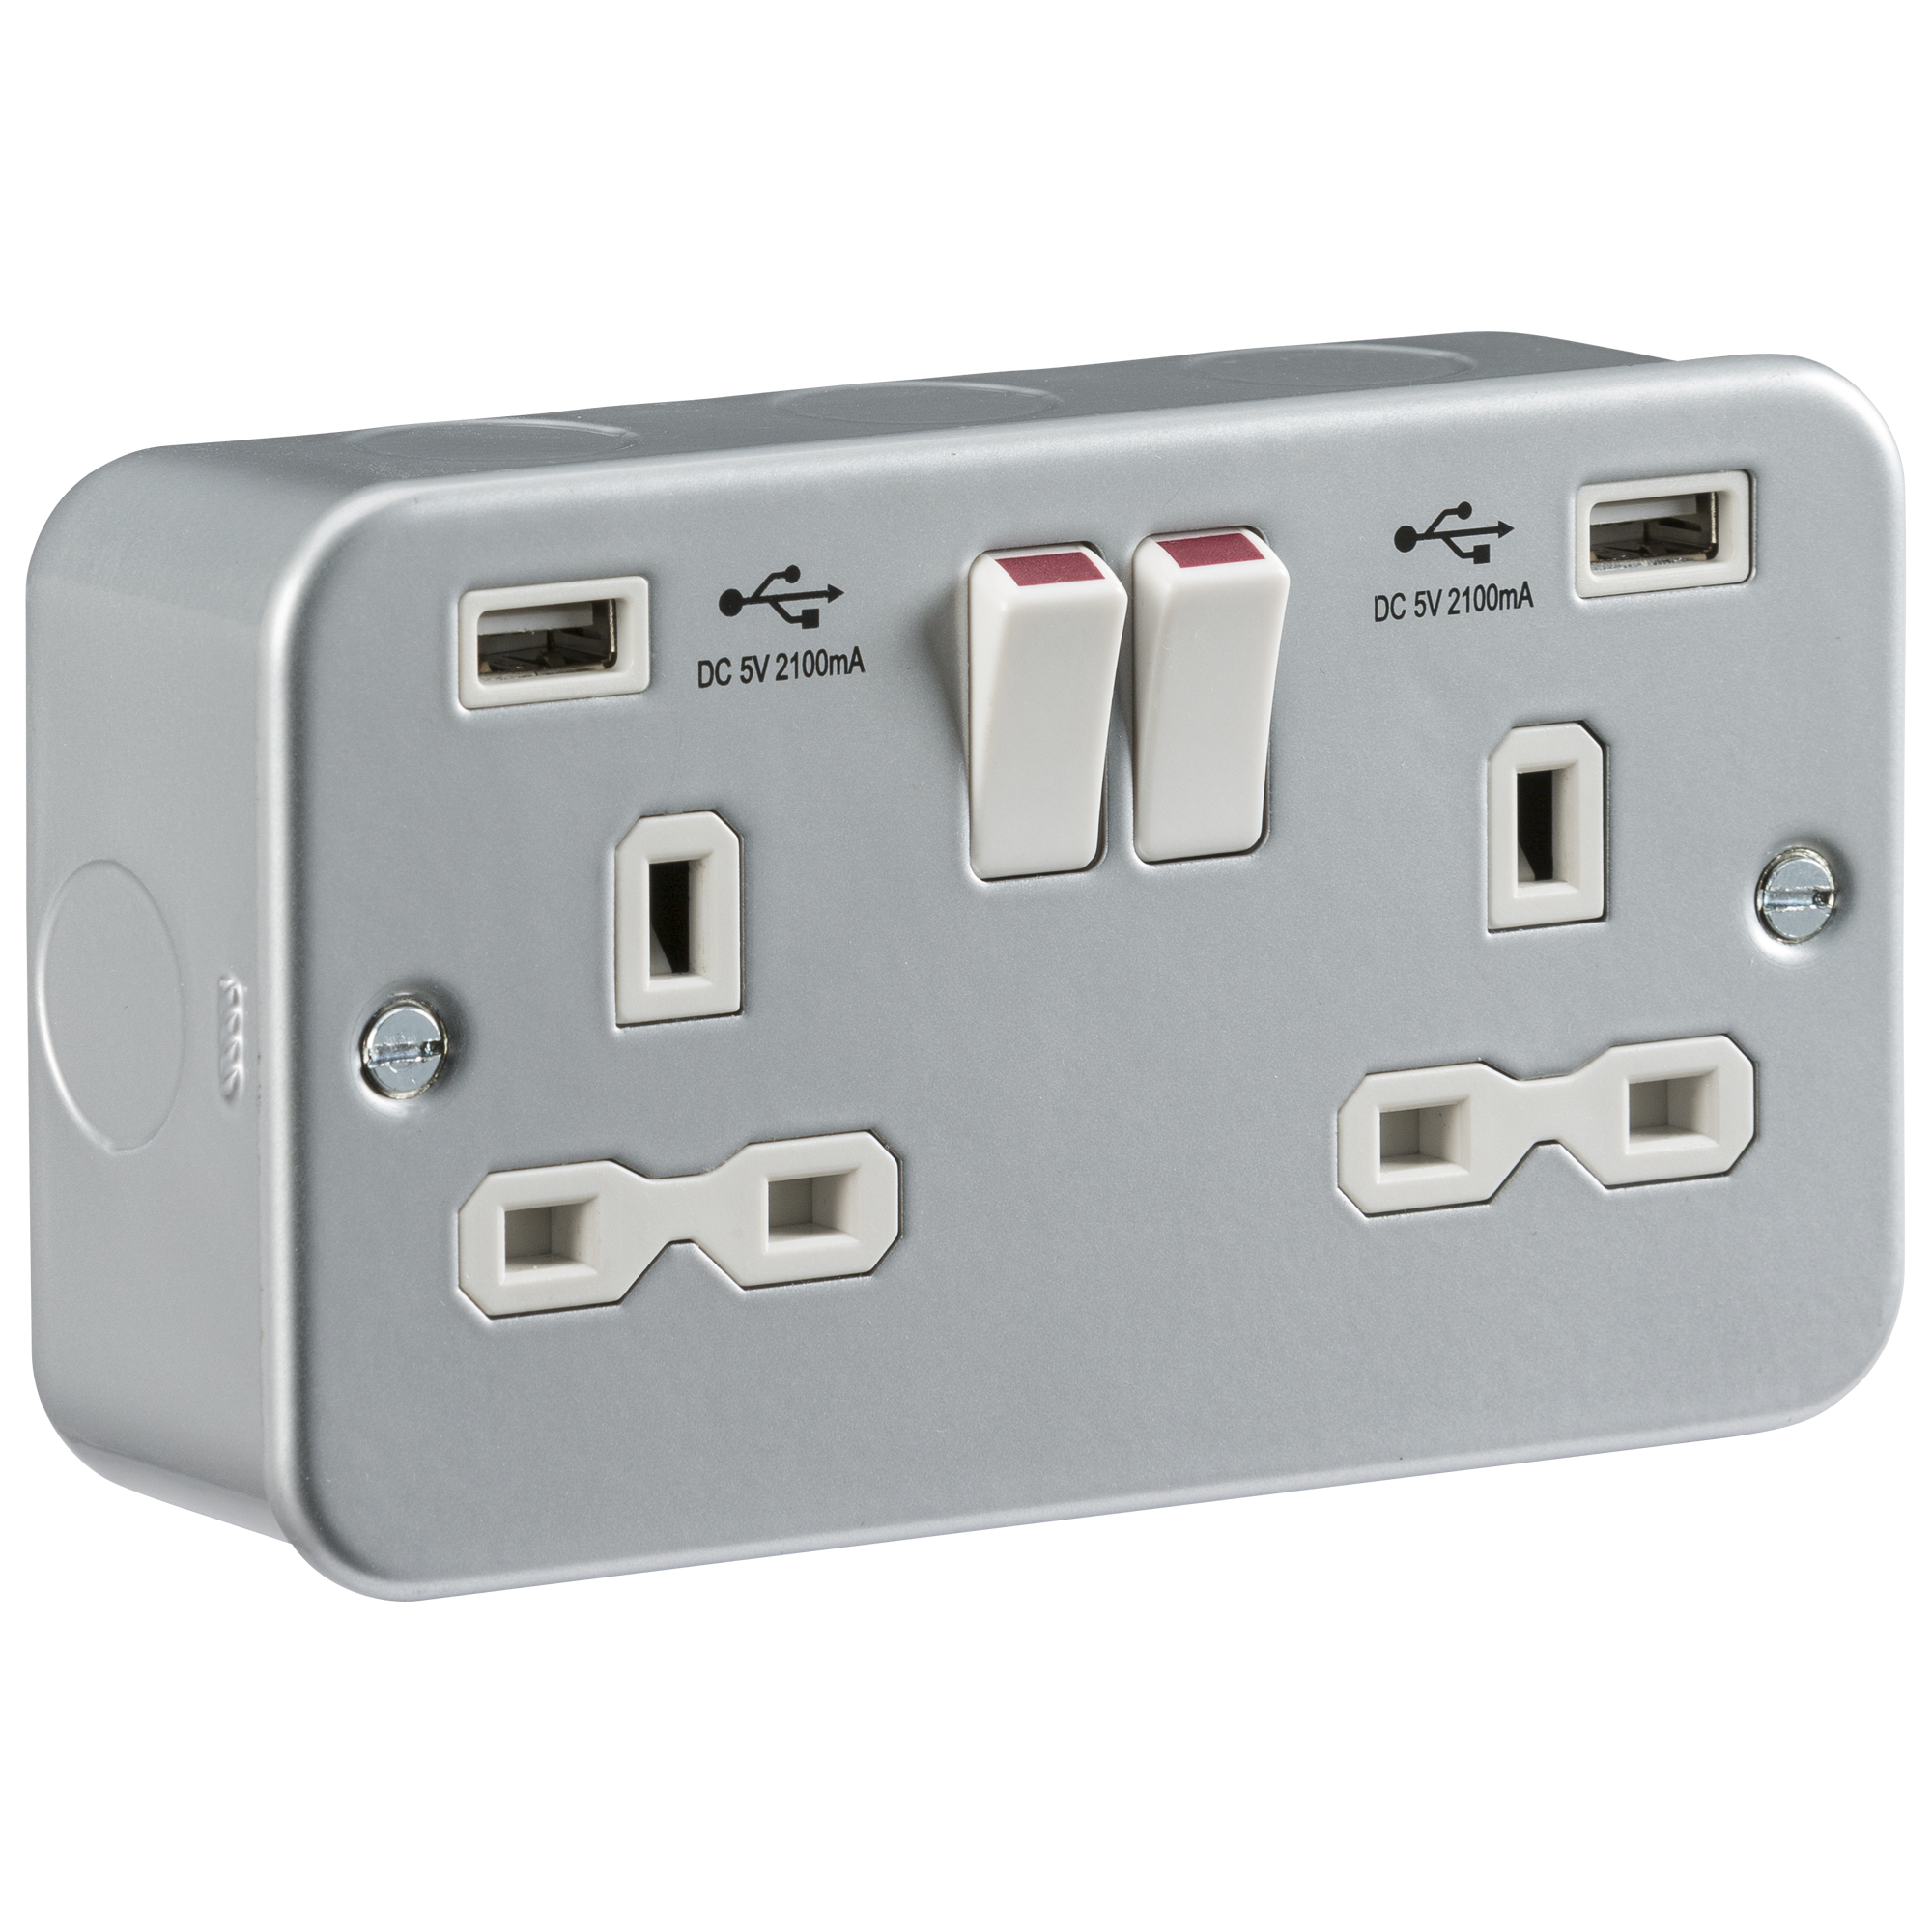 Metal Clad 13A 2G Switched Socket With Dual USB Charger 5V DC 2.1A (shared) - MR9000USB 